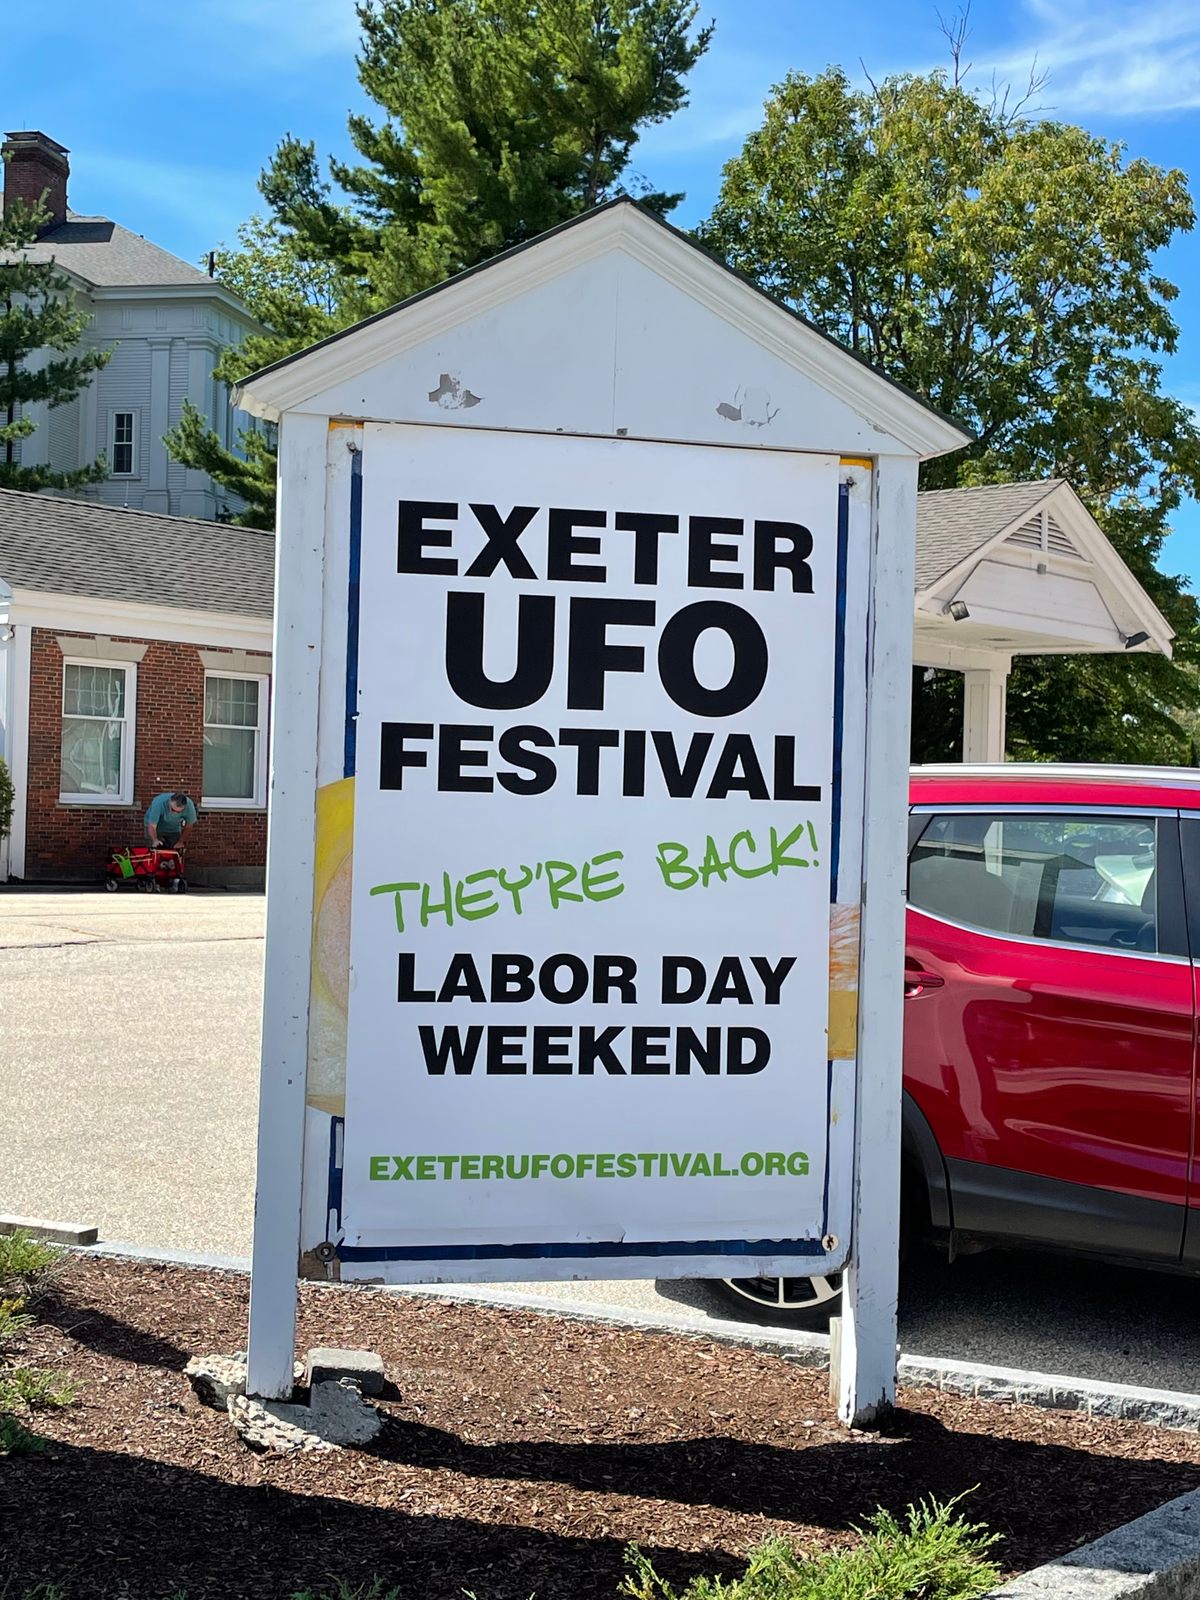 Exeter UFO Festival Exeter, New Hampshire Atlas Obscura